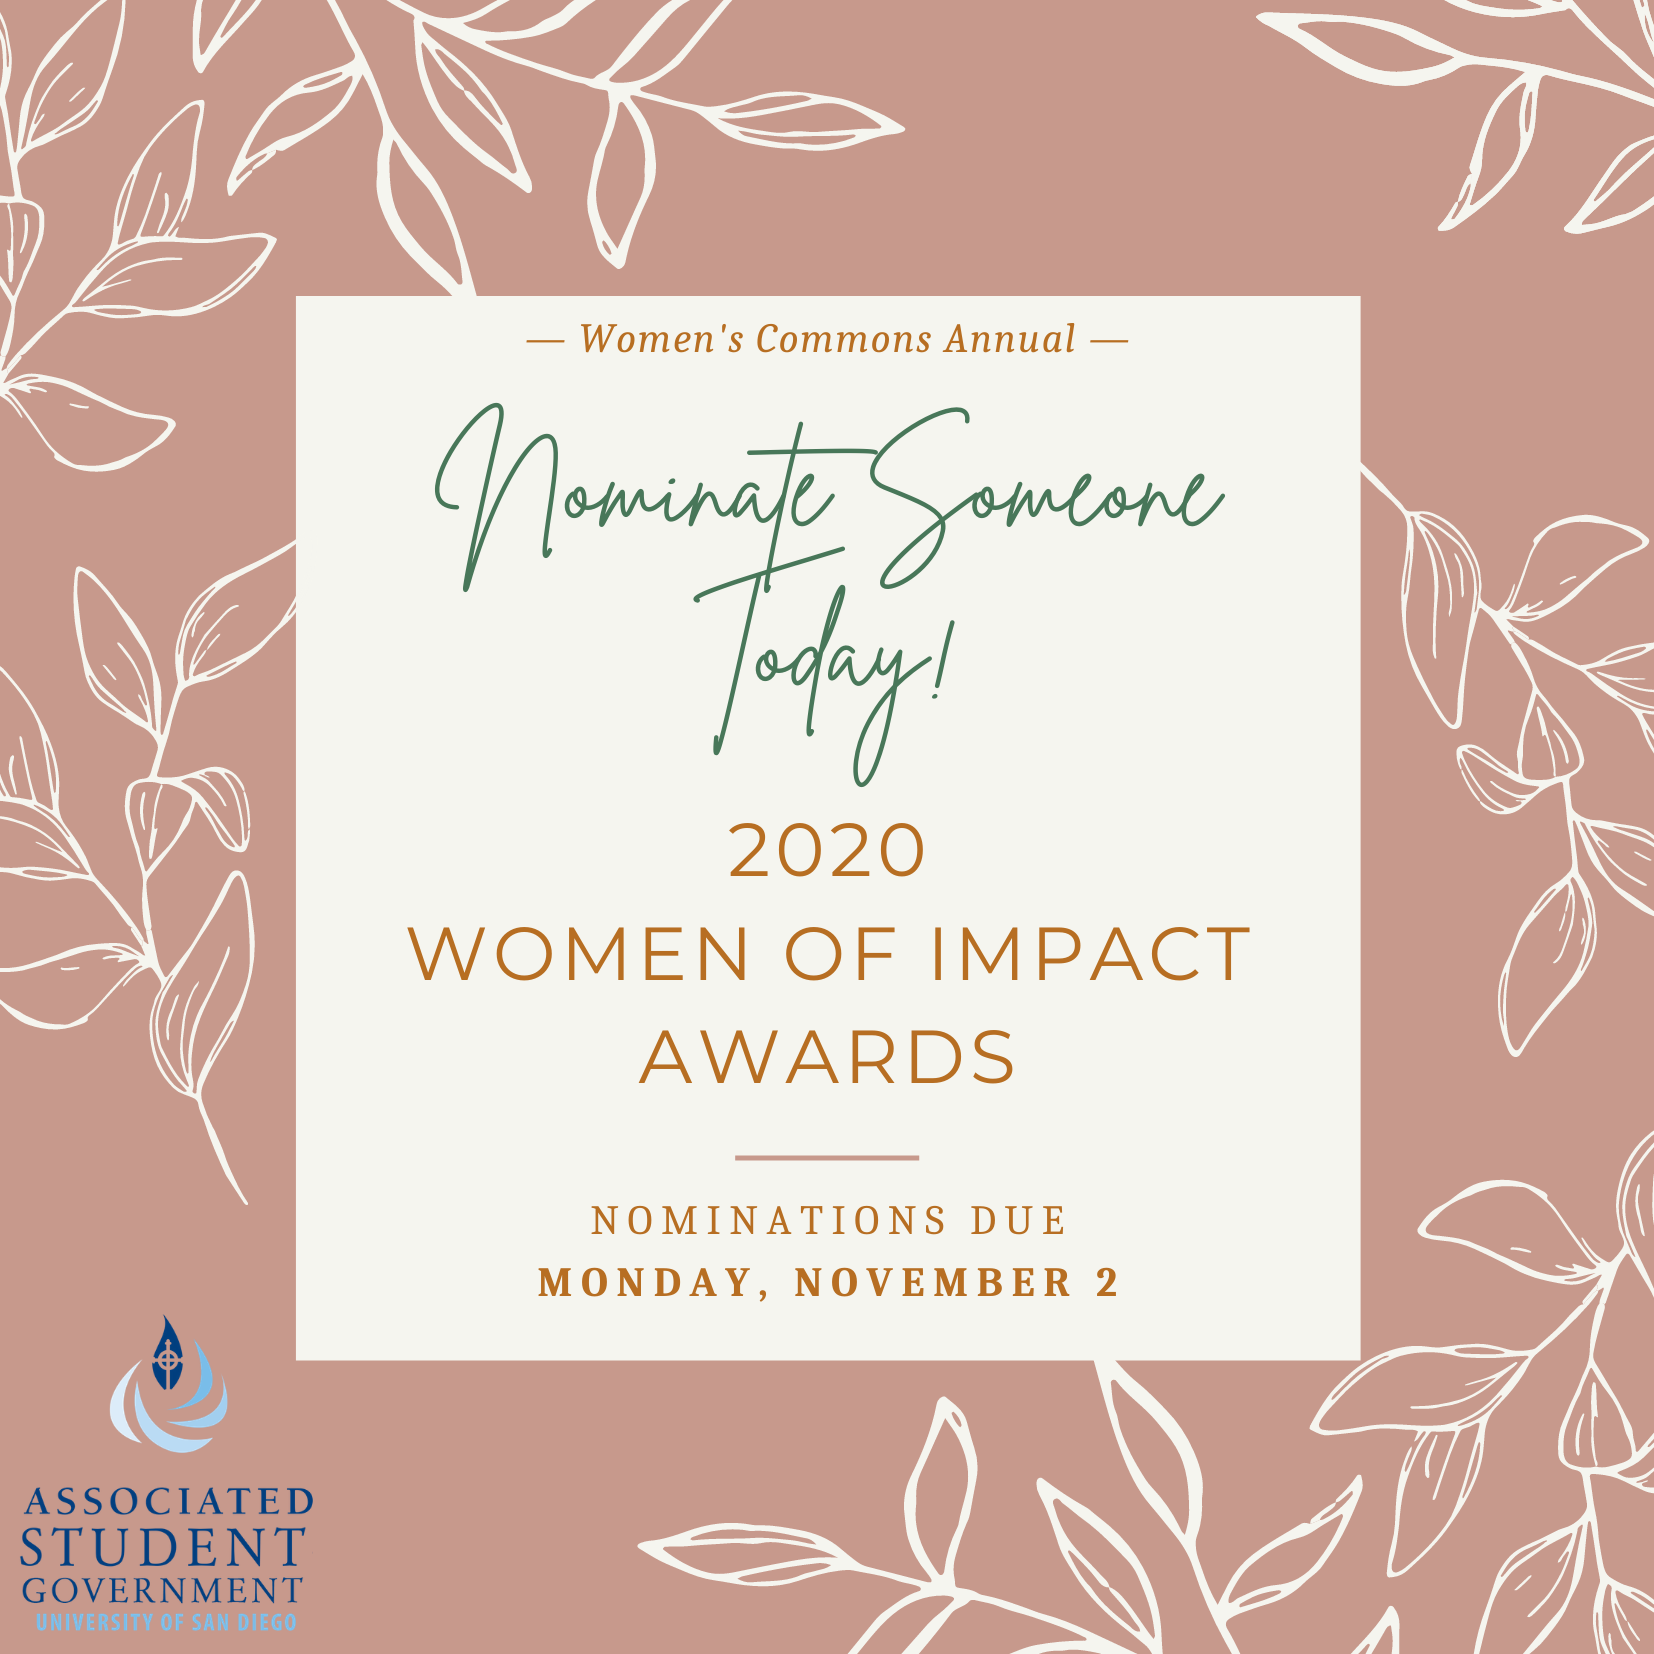 Nominate Someone Today! 2020 Women of Impact Awards, Nominations due November 2